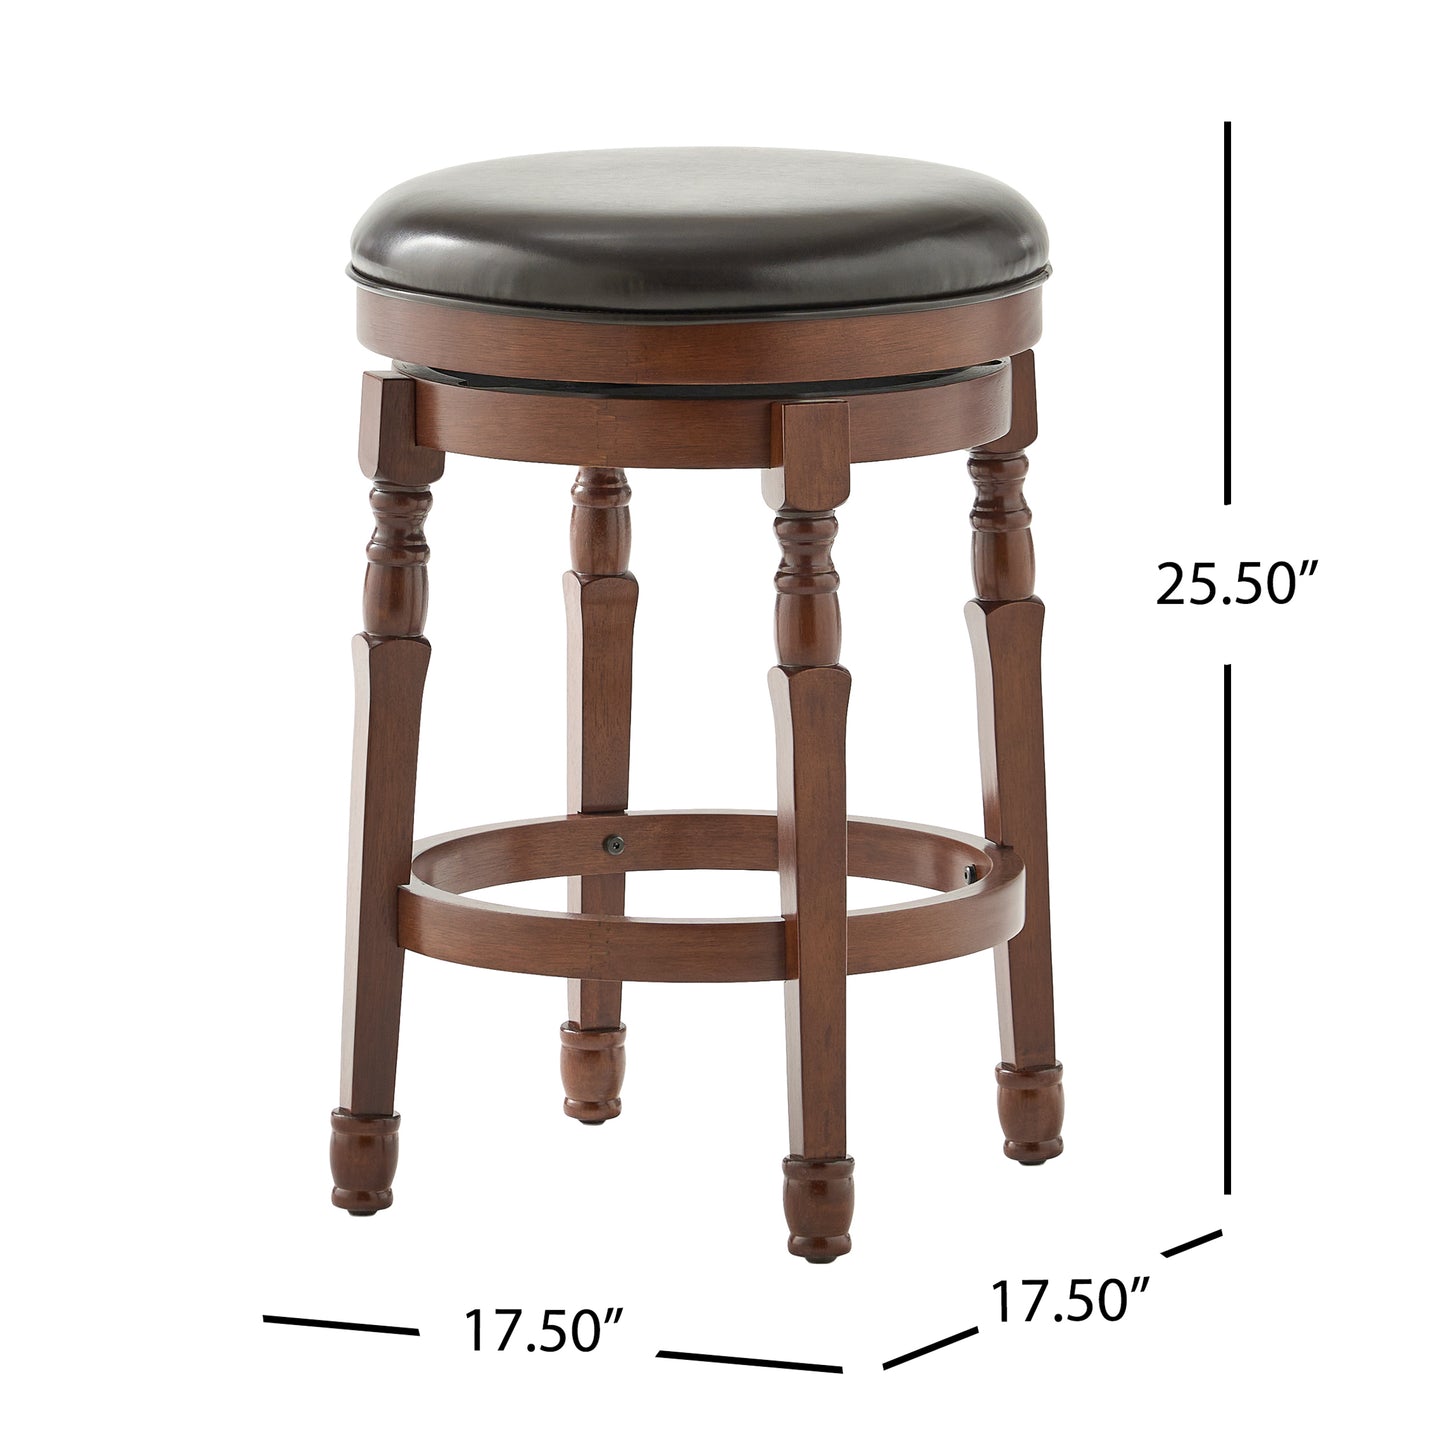 Jaxx Brown Leather Swivel 26-Inch Counter Stool (Set of 2)